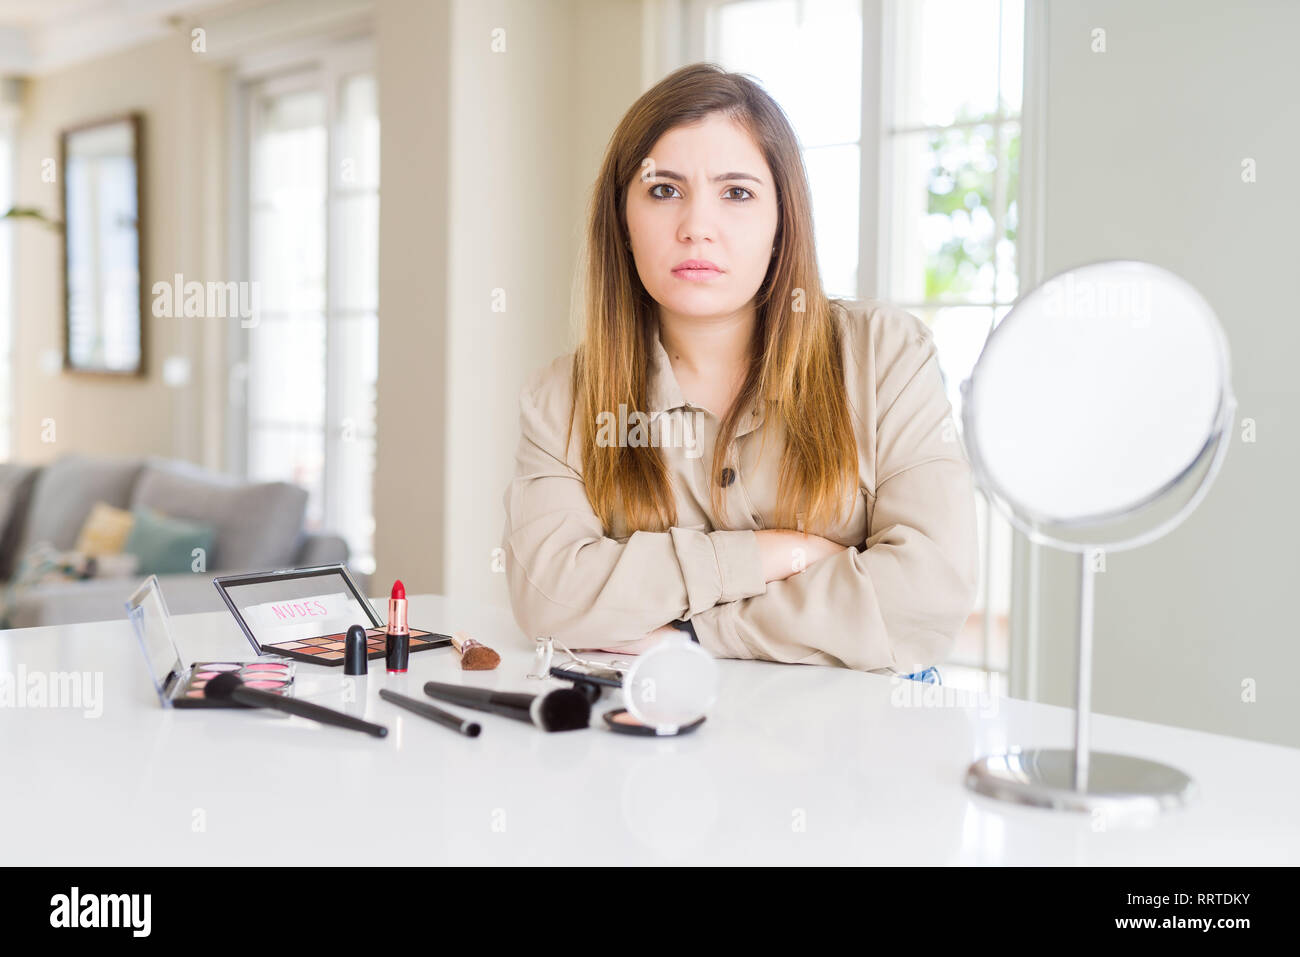 Beautiful young woman using make up cosmetics skeptic and nervous, disapproving expression on face with crossed arms. Negative person. Stock Photo